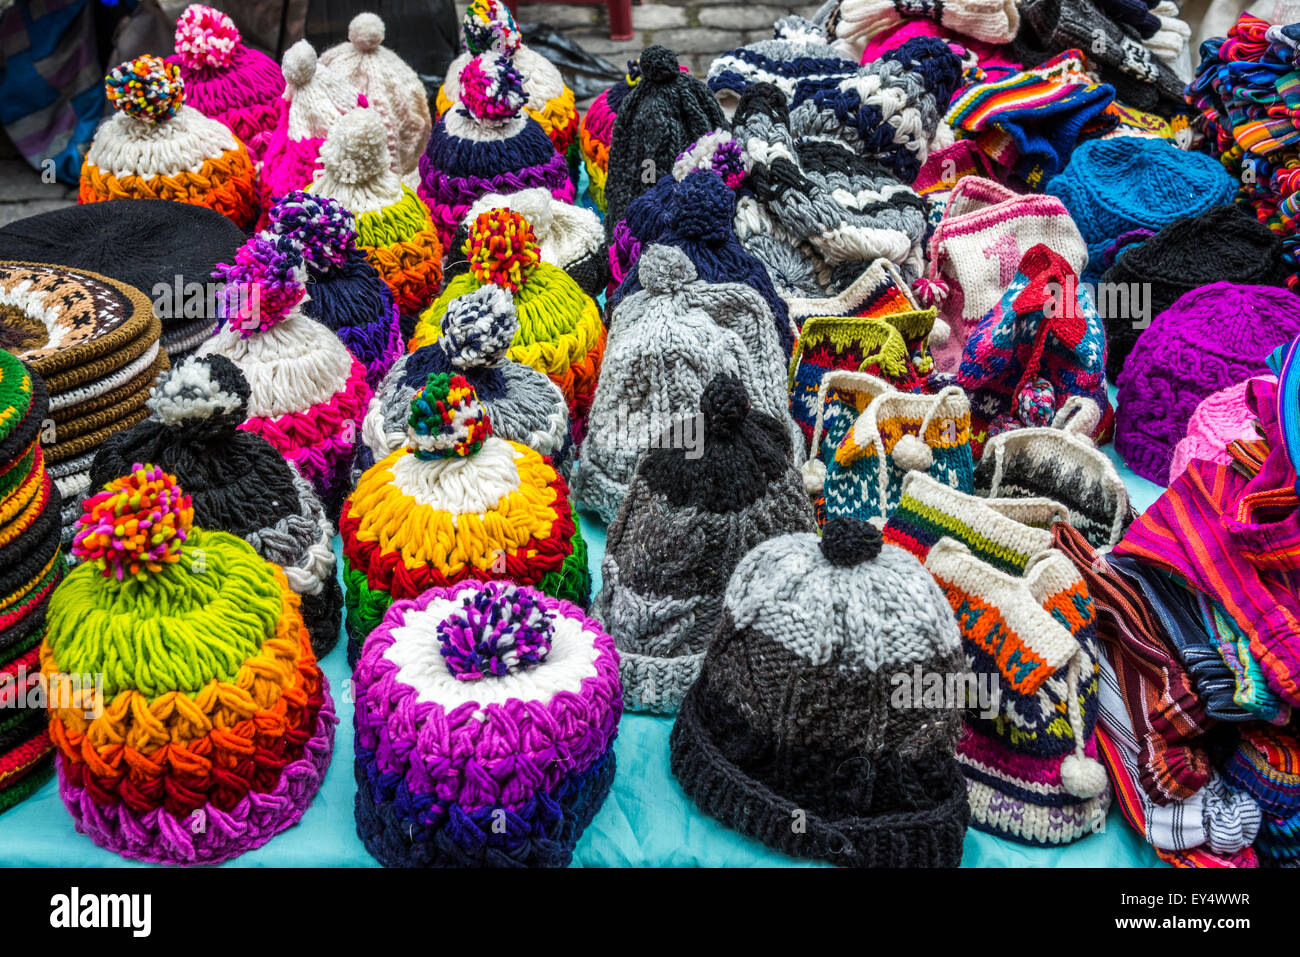 Colorful hand-knitted beanie hats for sale at local market. Otavalo, Ecuador. Stock Photo